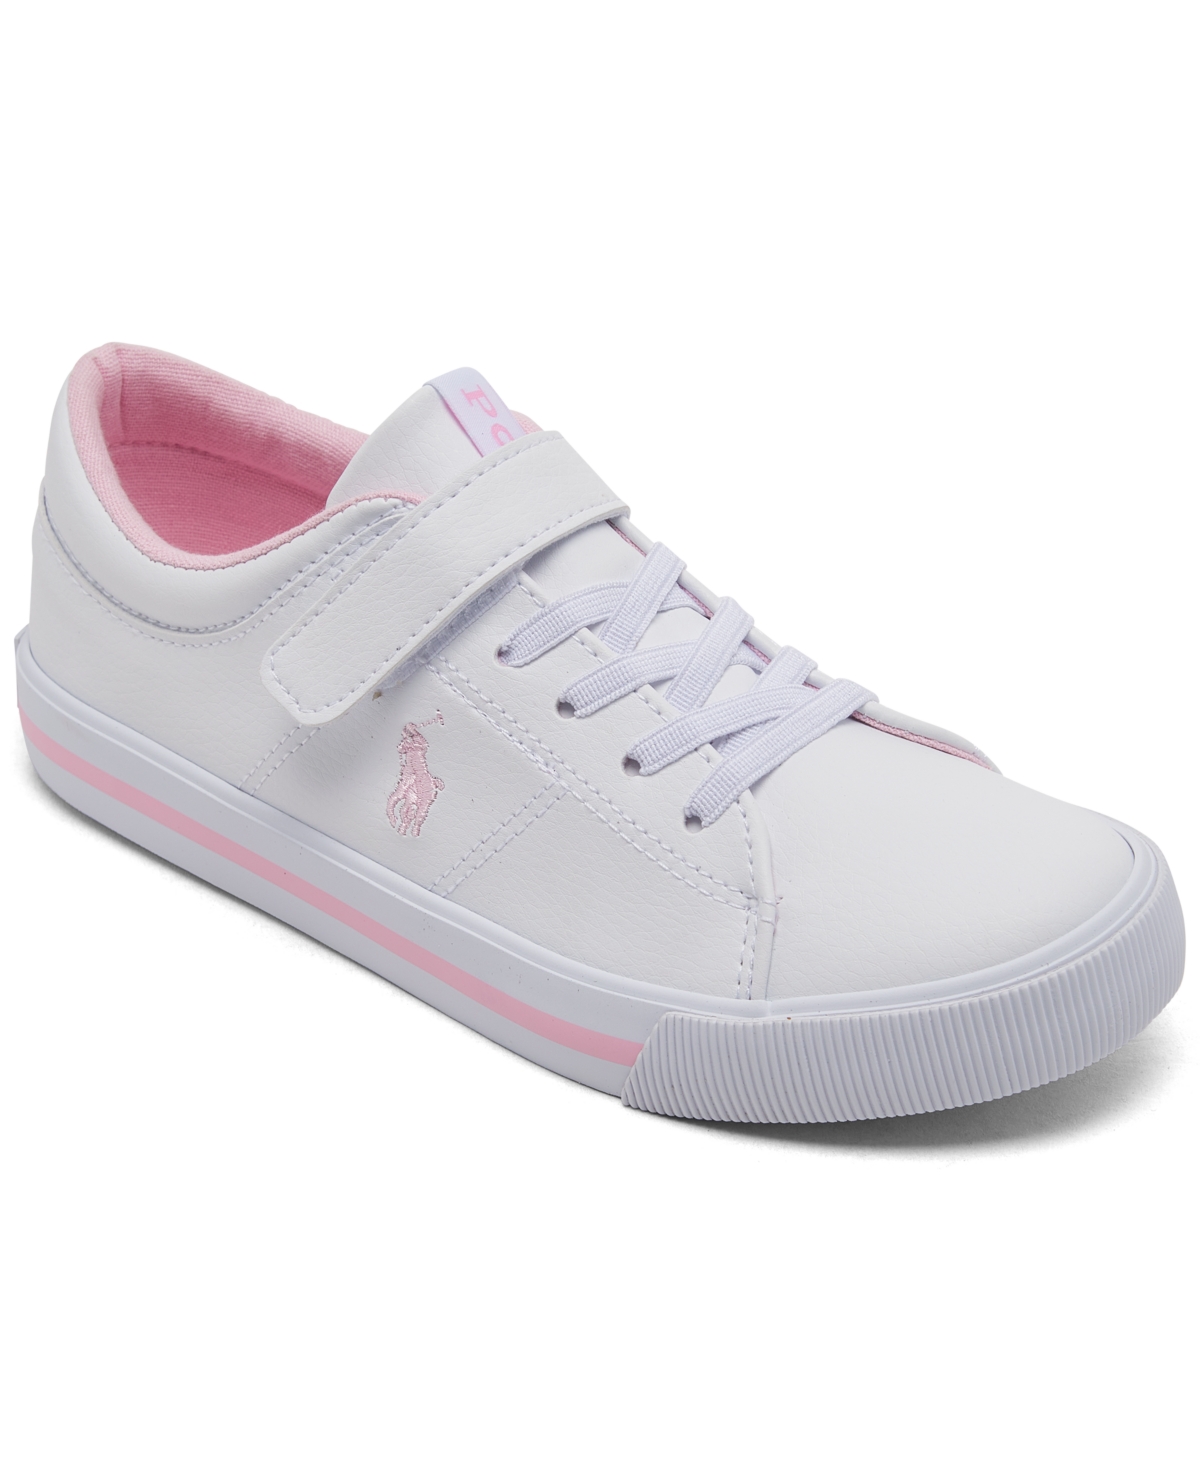 Polo Ralph Lauren Kids' Little Girls Elmwood Stay-put Closure Casual Sneakers From Finish Line In White,pink